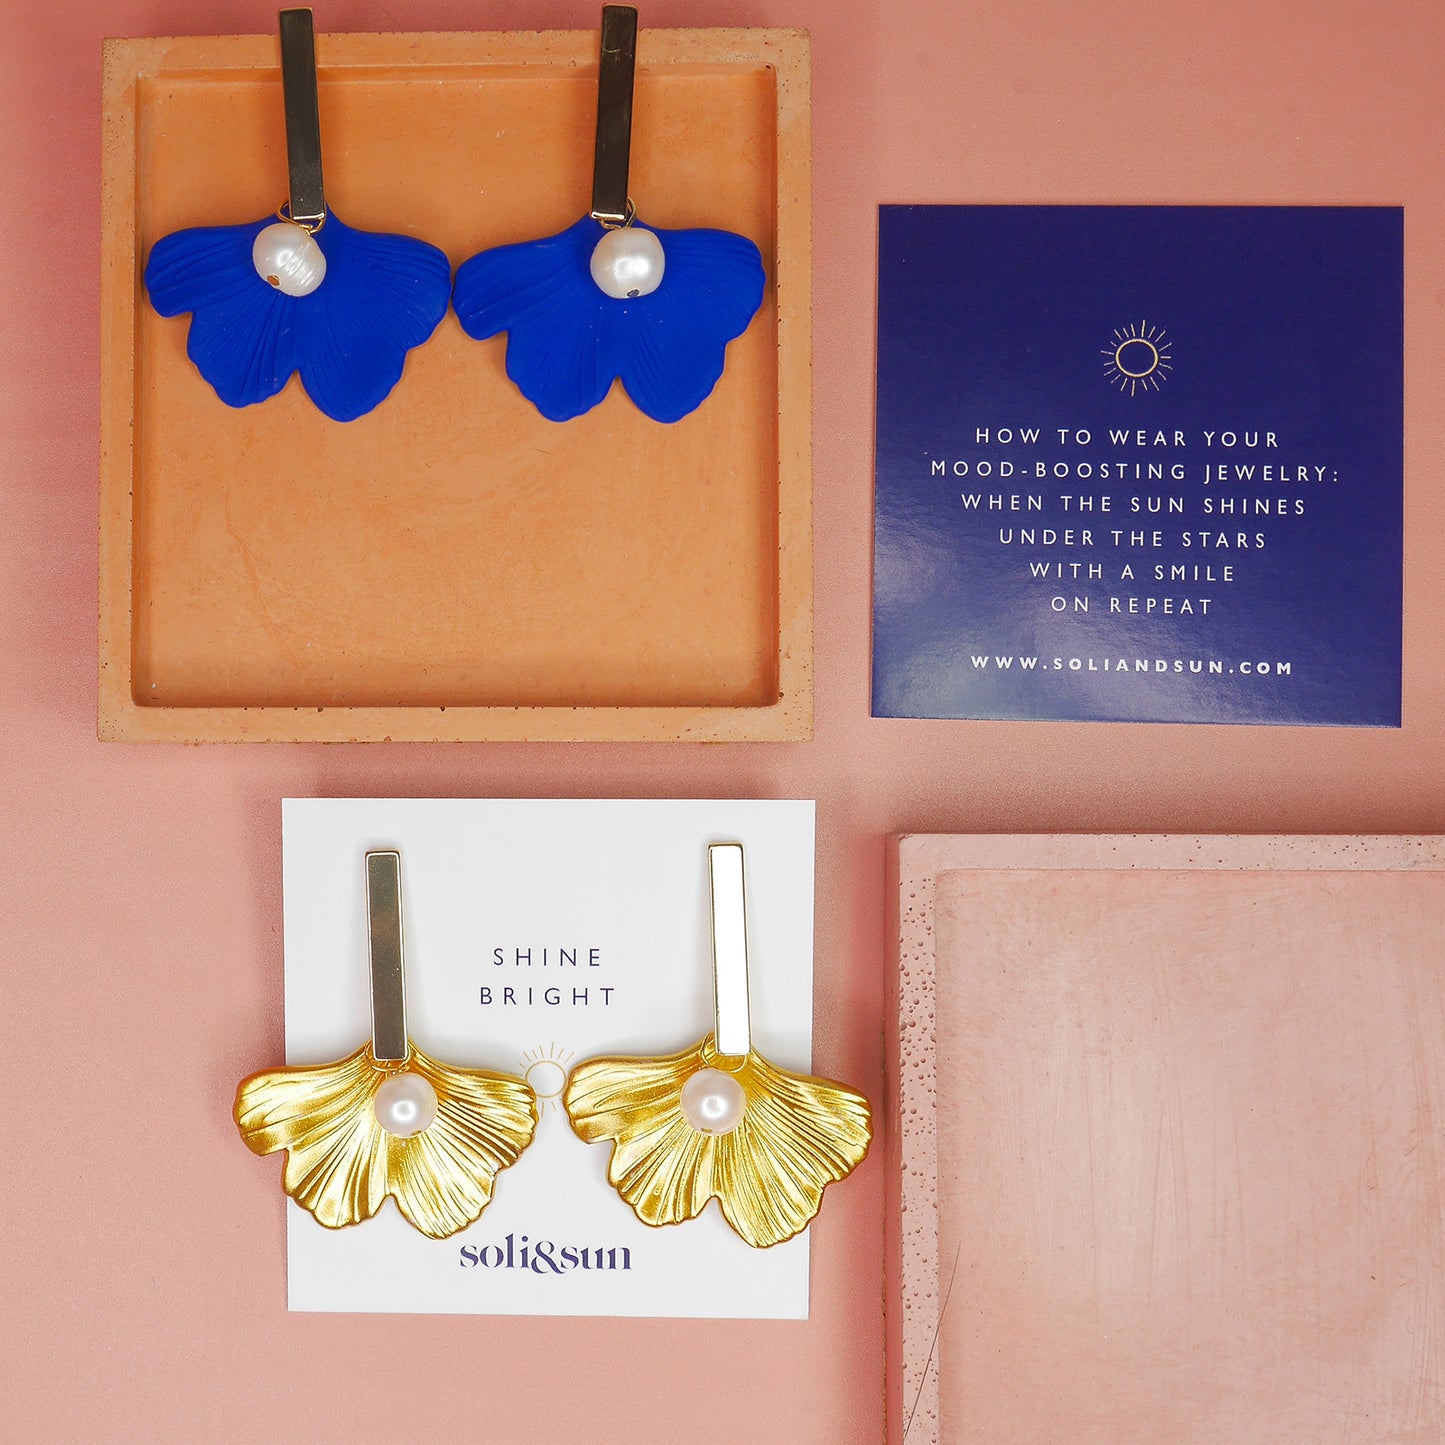 THE DAPHNE Gold Ginkgo Leaf Statement Earrings